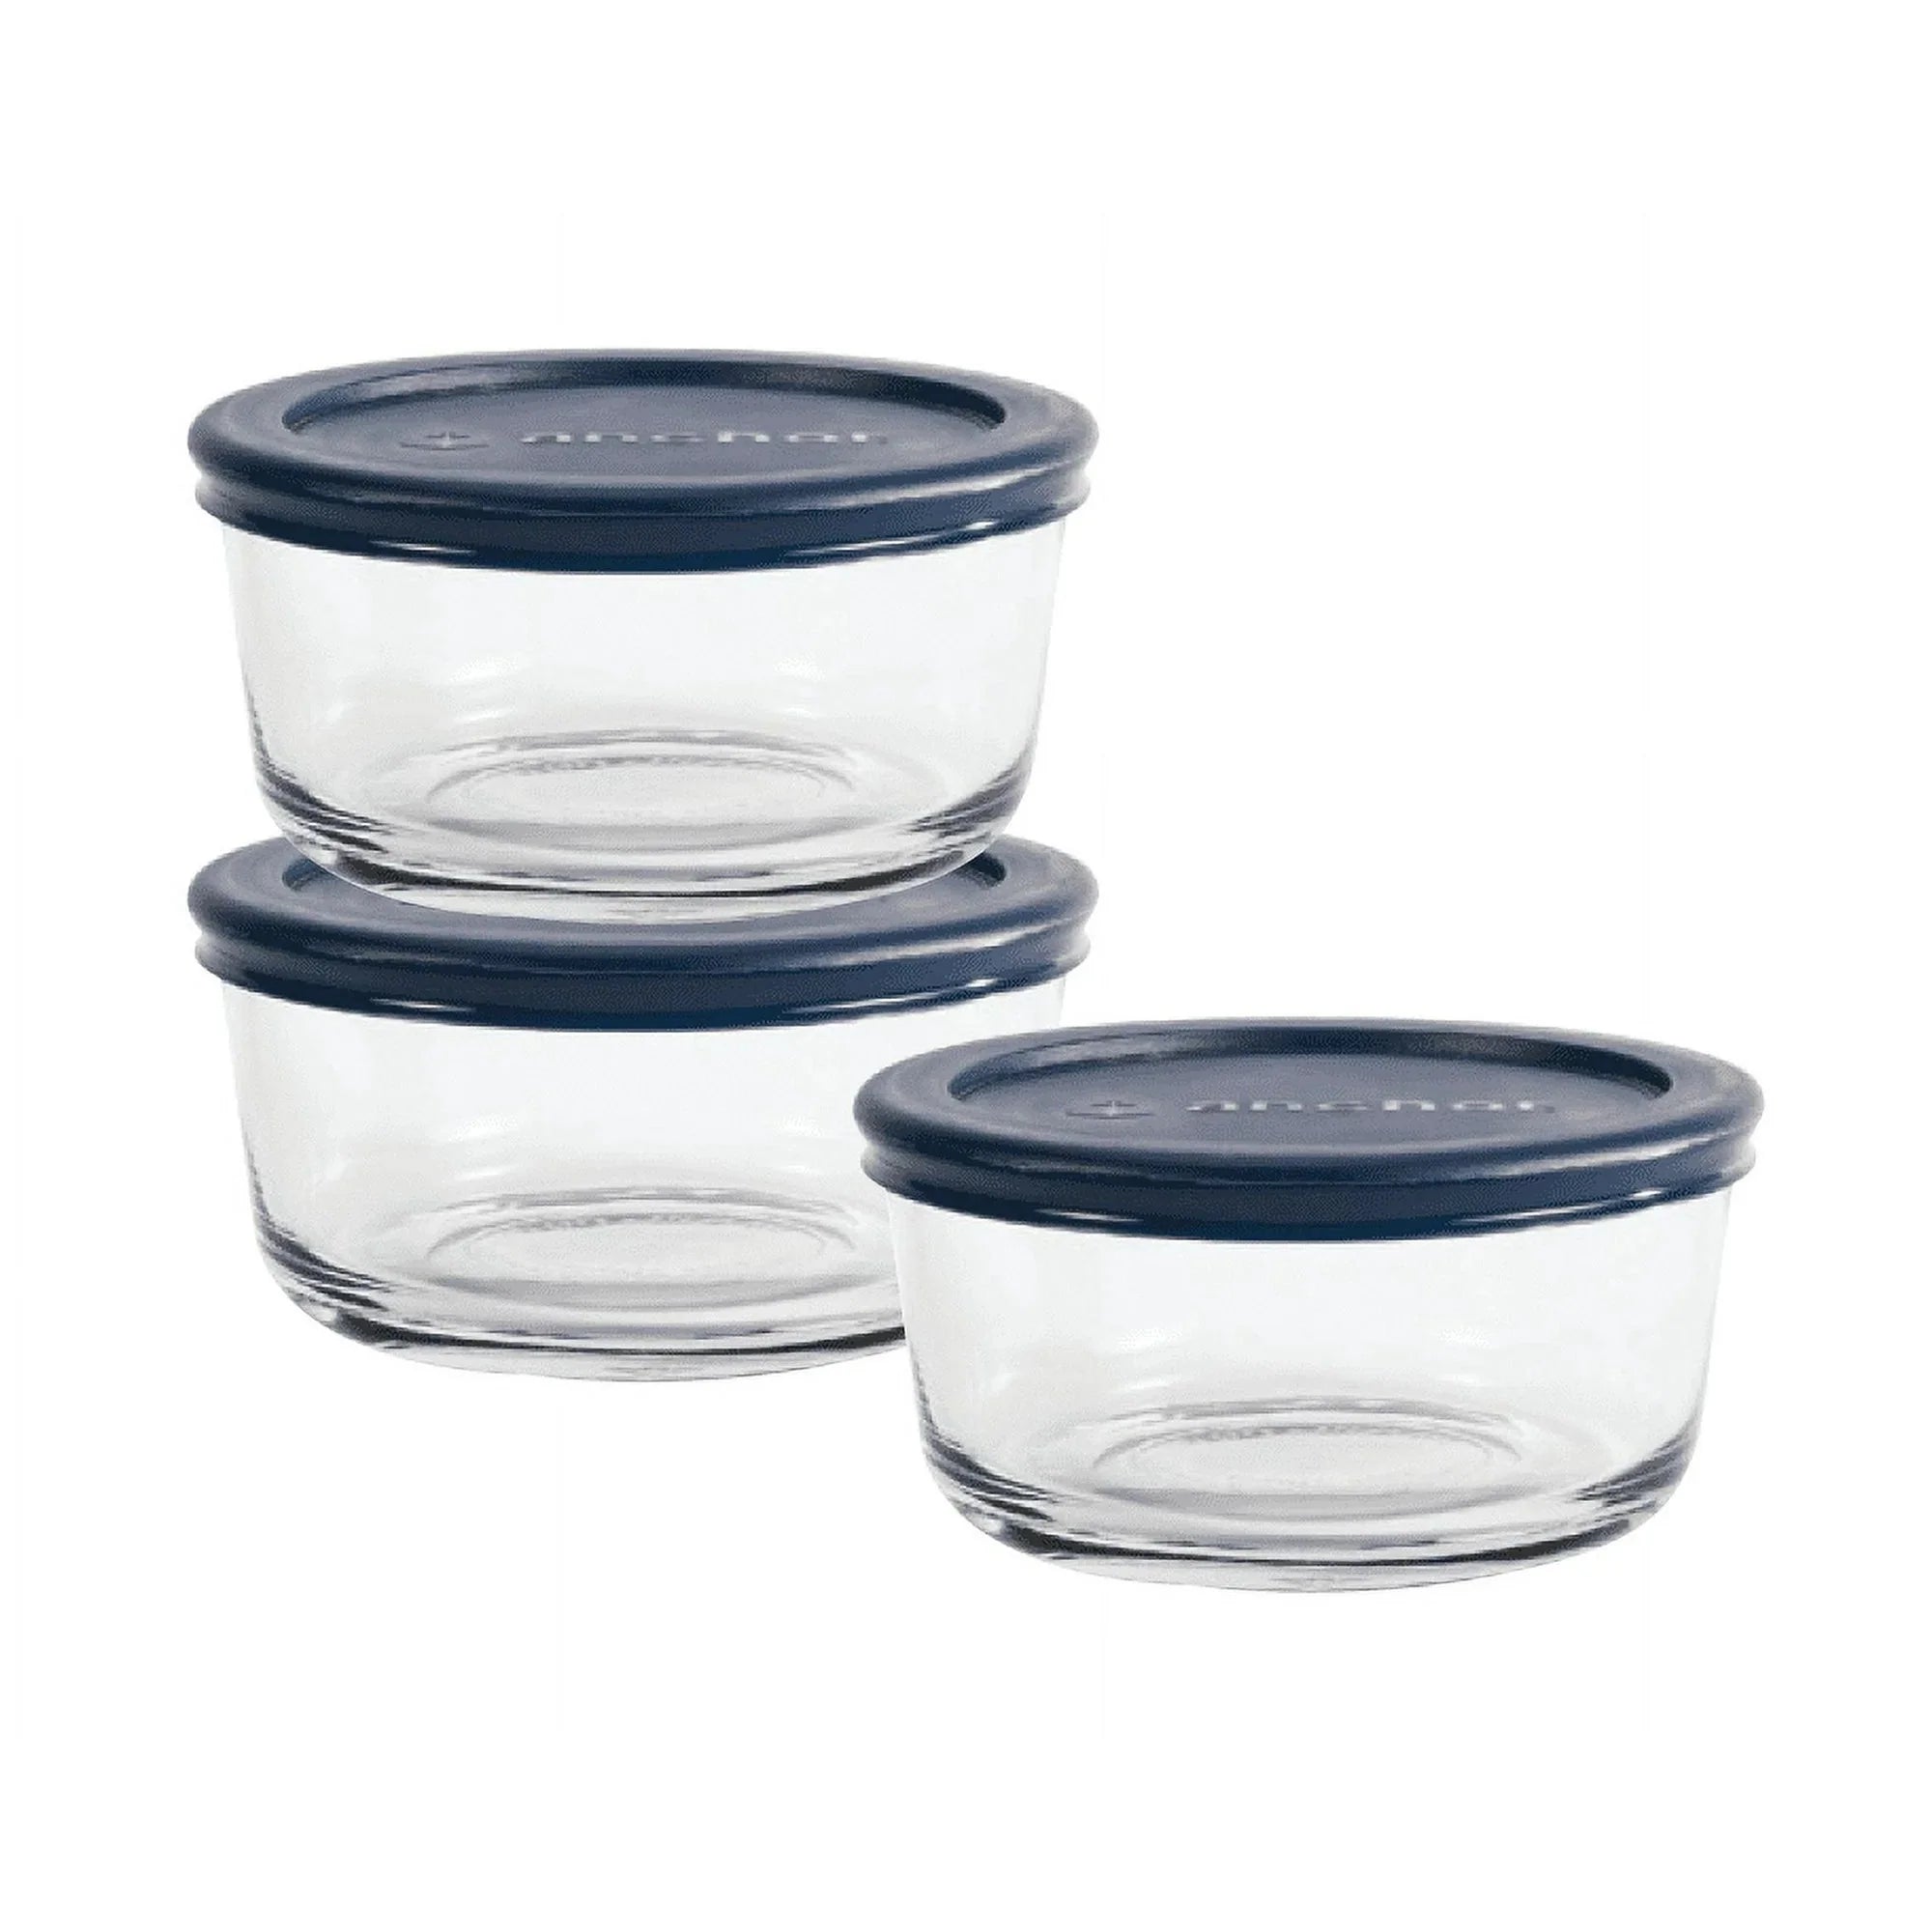 Wholesale prices with free shipping all over United States Anchor Hocking Glass Food Storage Containers with Lids, 2 Cup Round, Set of 3 - Steven Deals